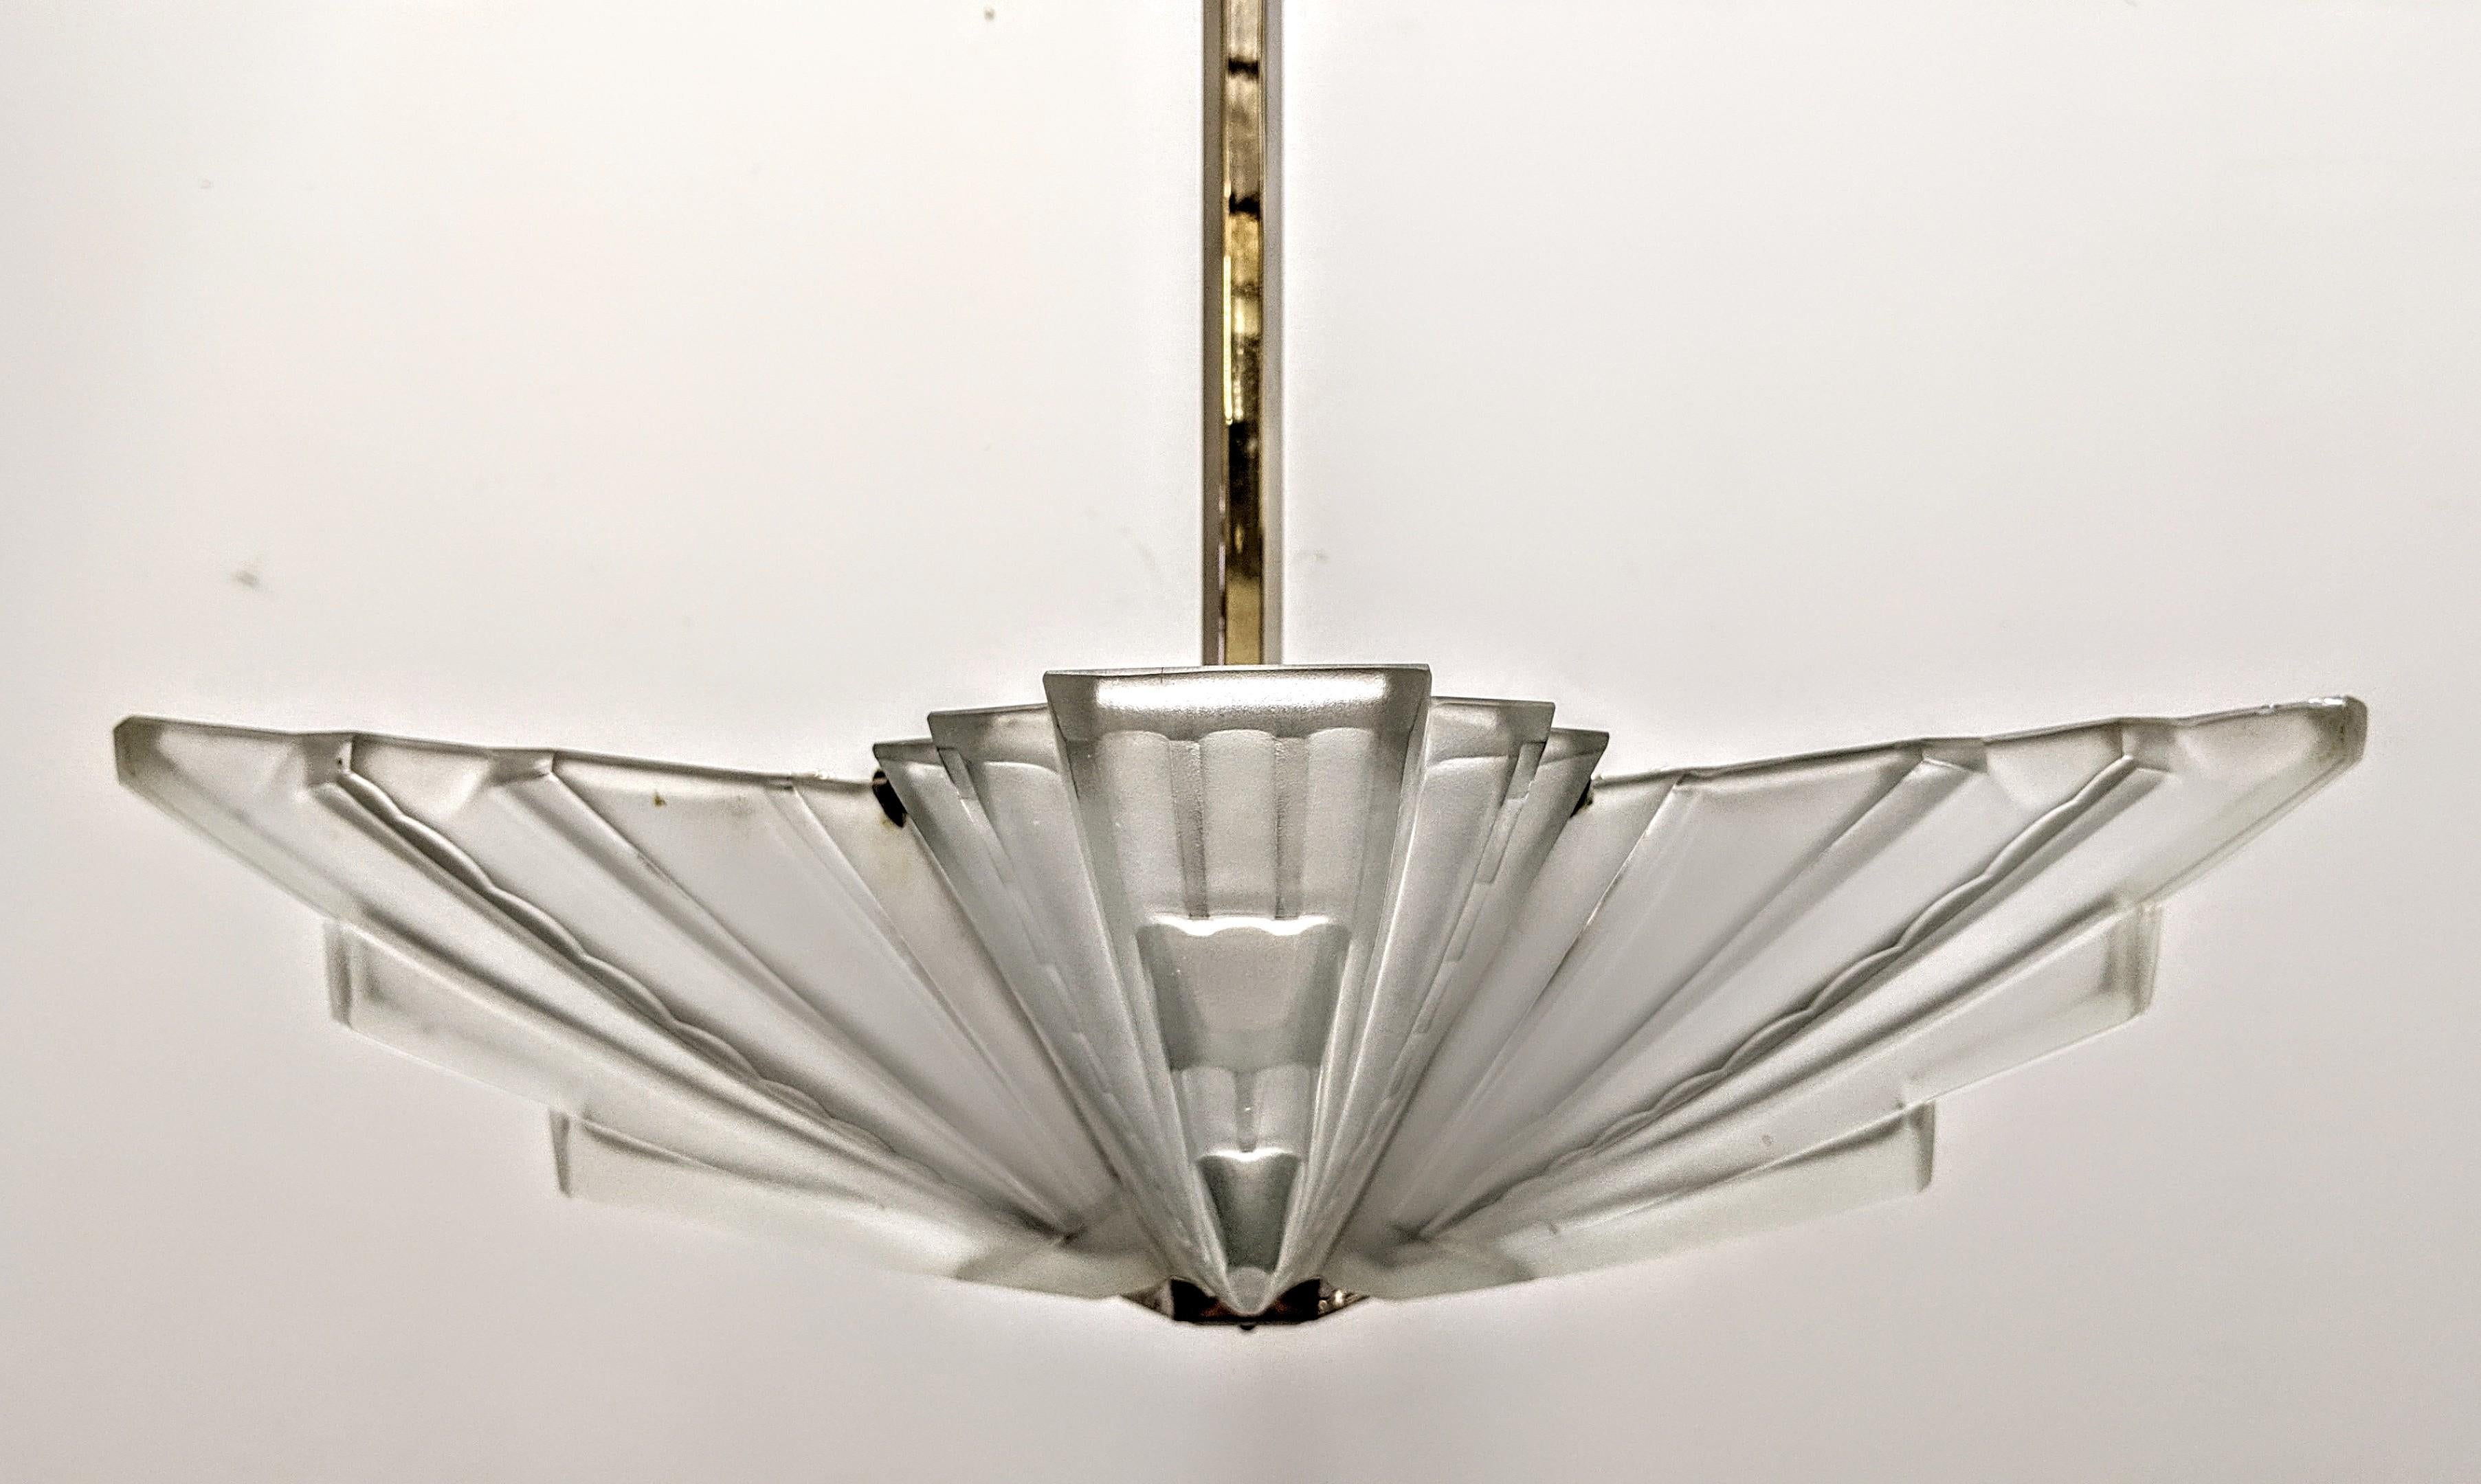 
A rare French Art Deco chandelier from the 1930's was designed by the glass master 